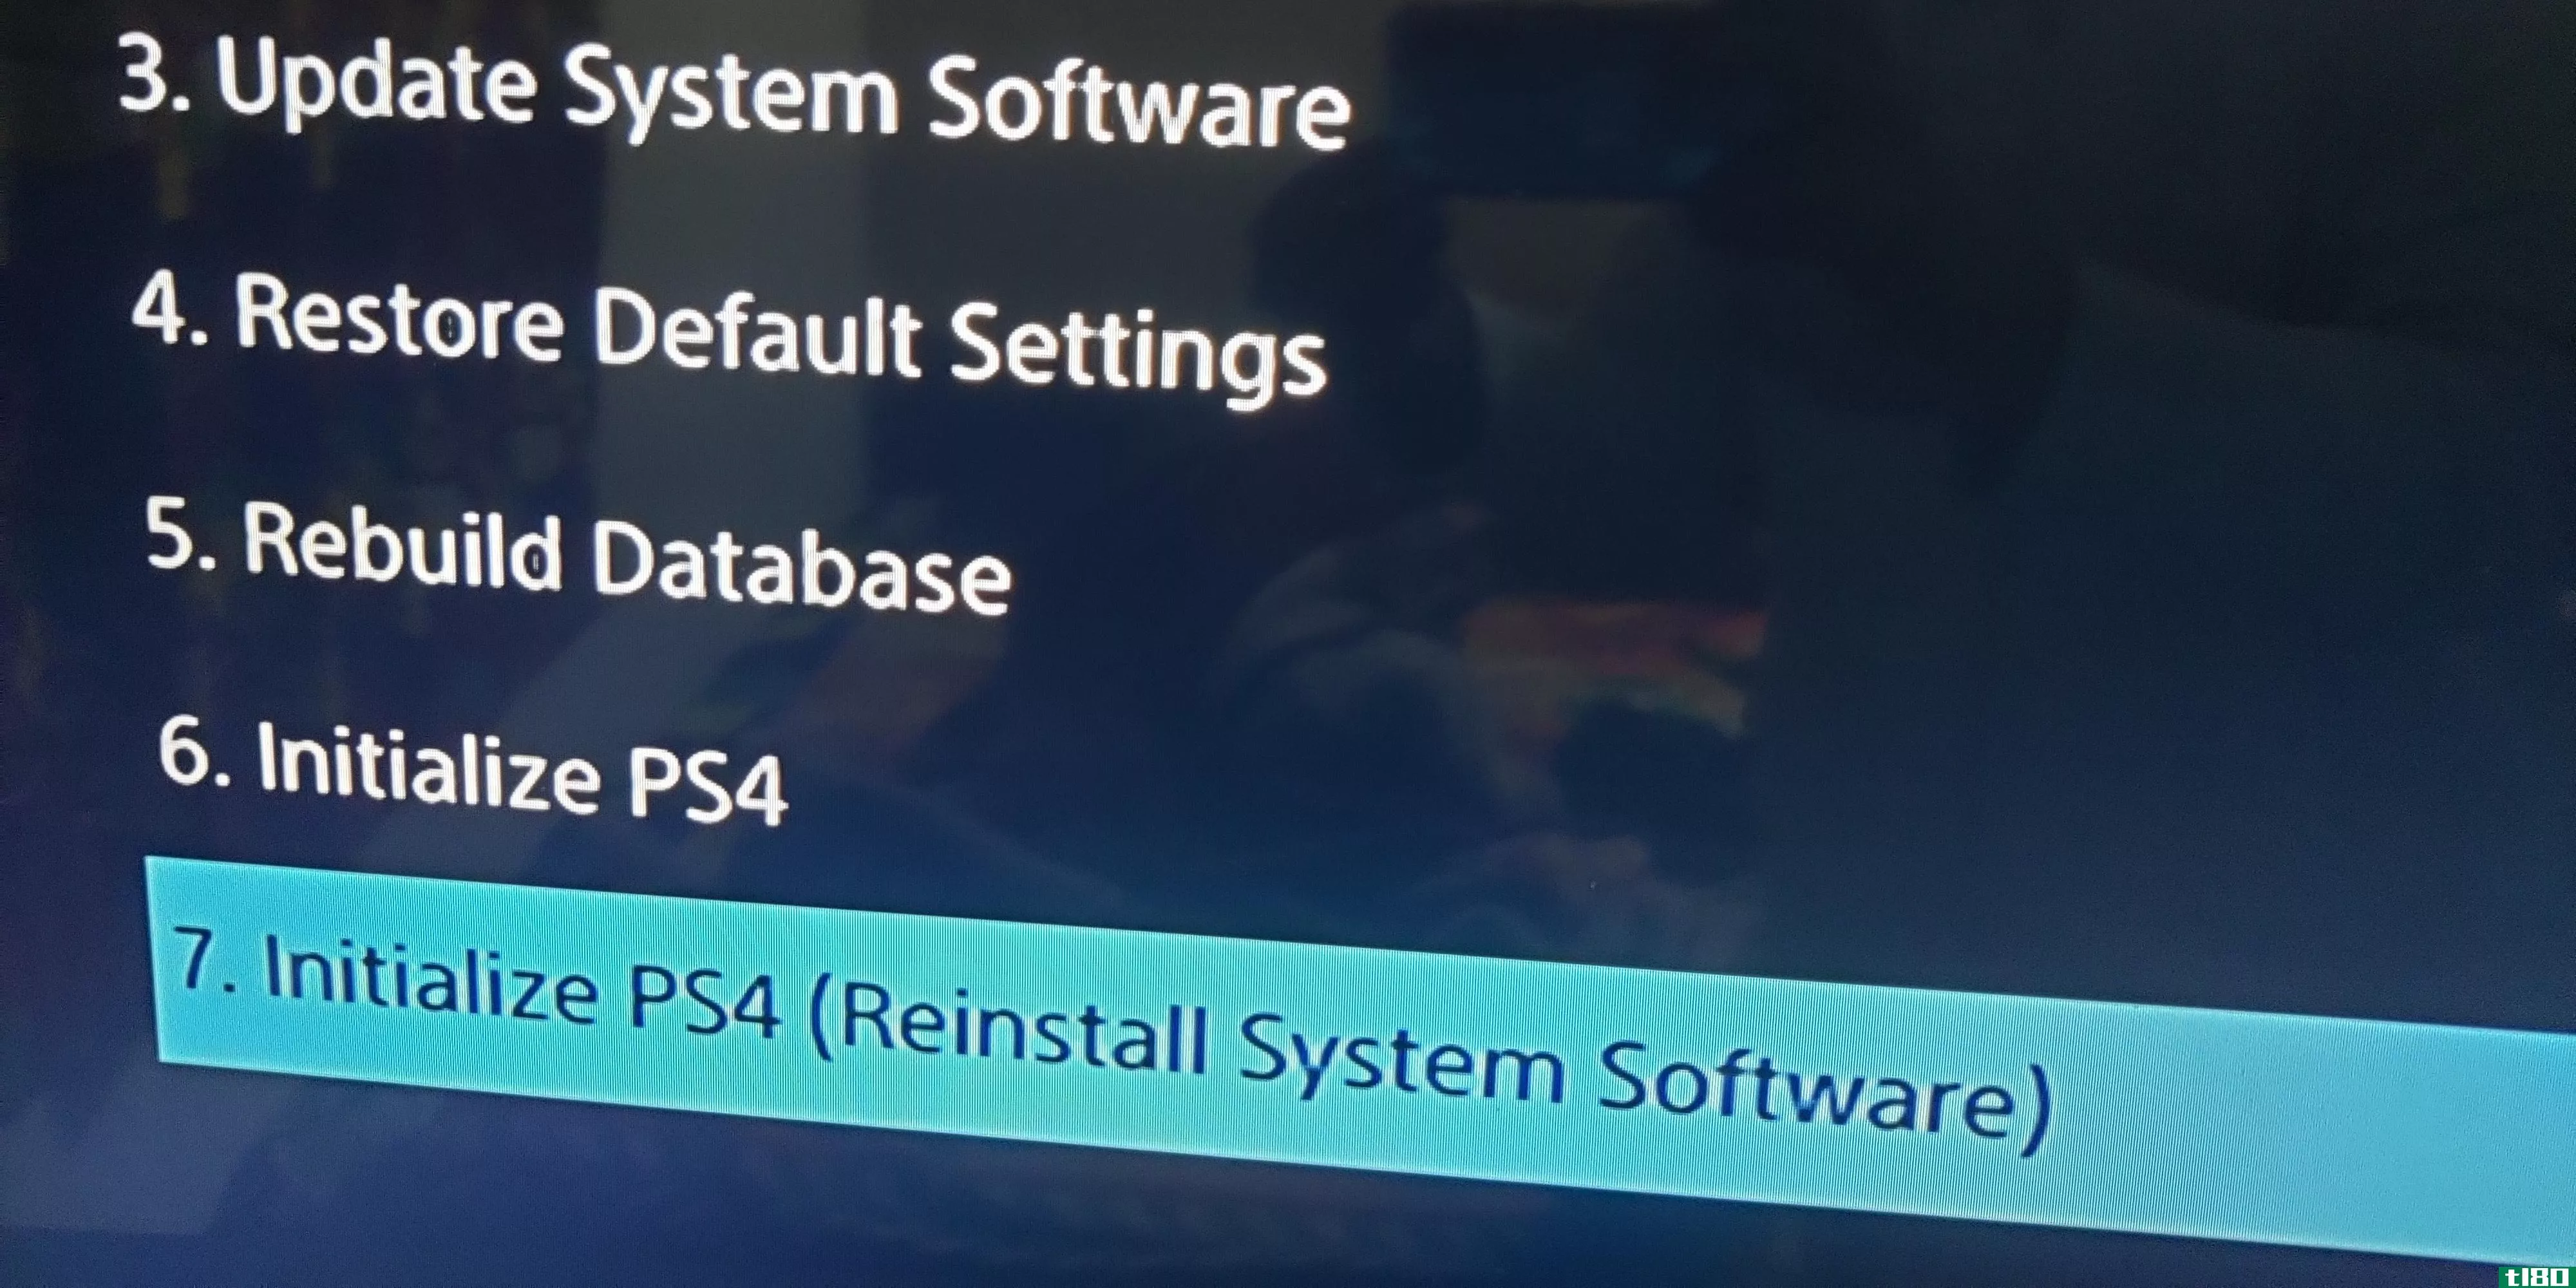 Reinstall software on the PS4